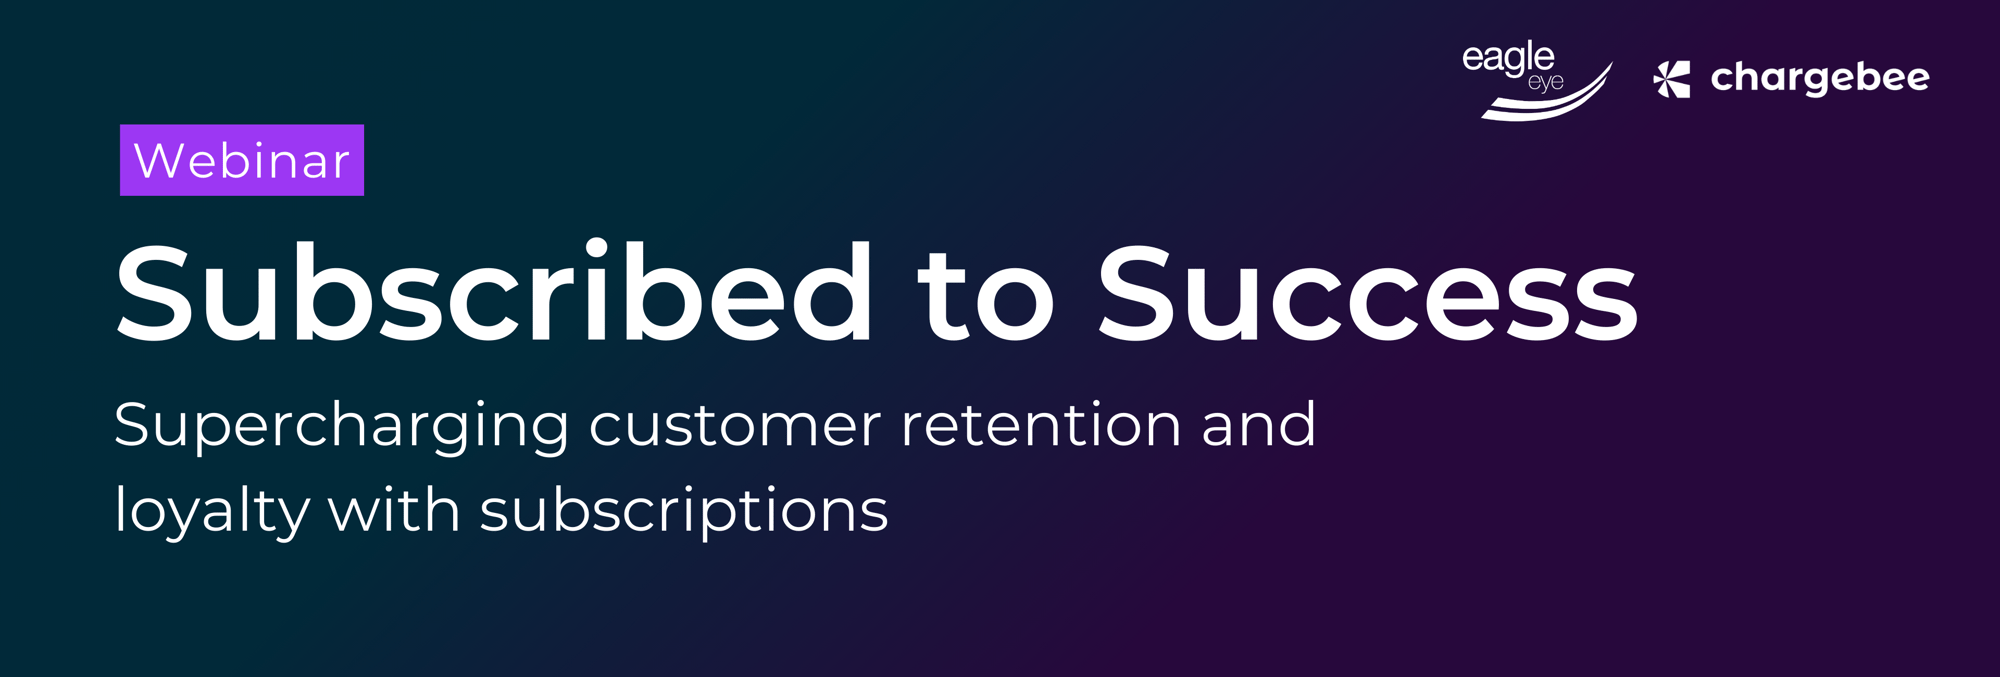 Subscribed to Success: Supercharging customer retention and loyalty with subscriptionsSubscribed to Success: Supercharging customer retention and loyalty with subscriptions